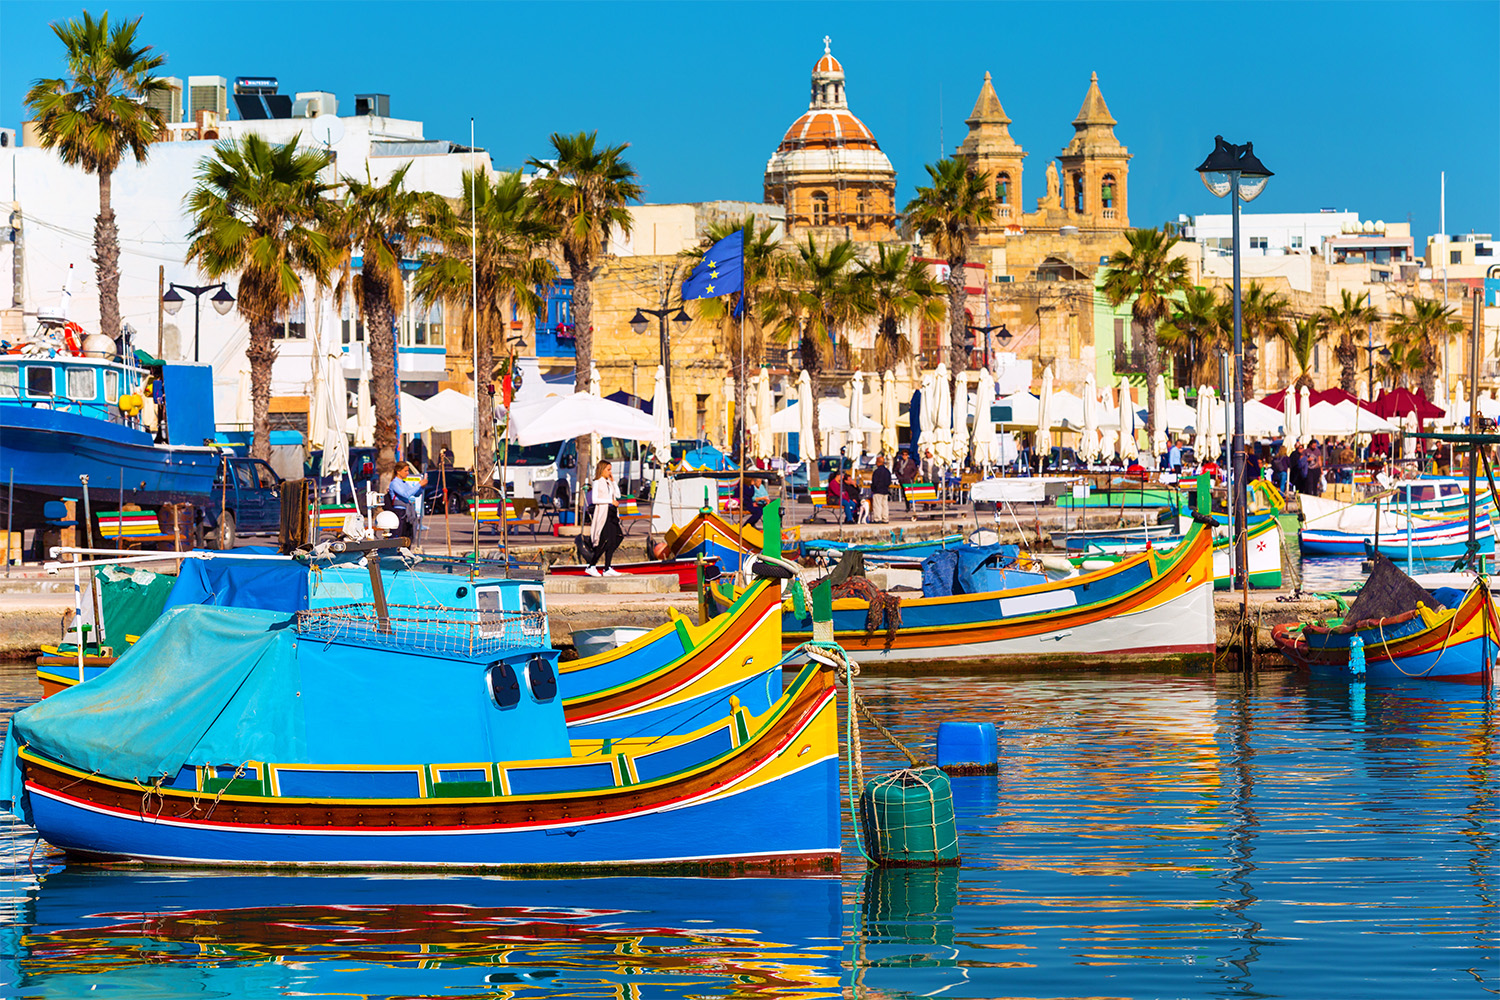 How To Apply for a Digital Nomad Visa in Malta